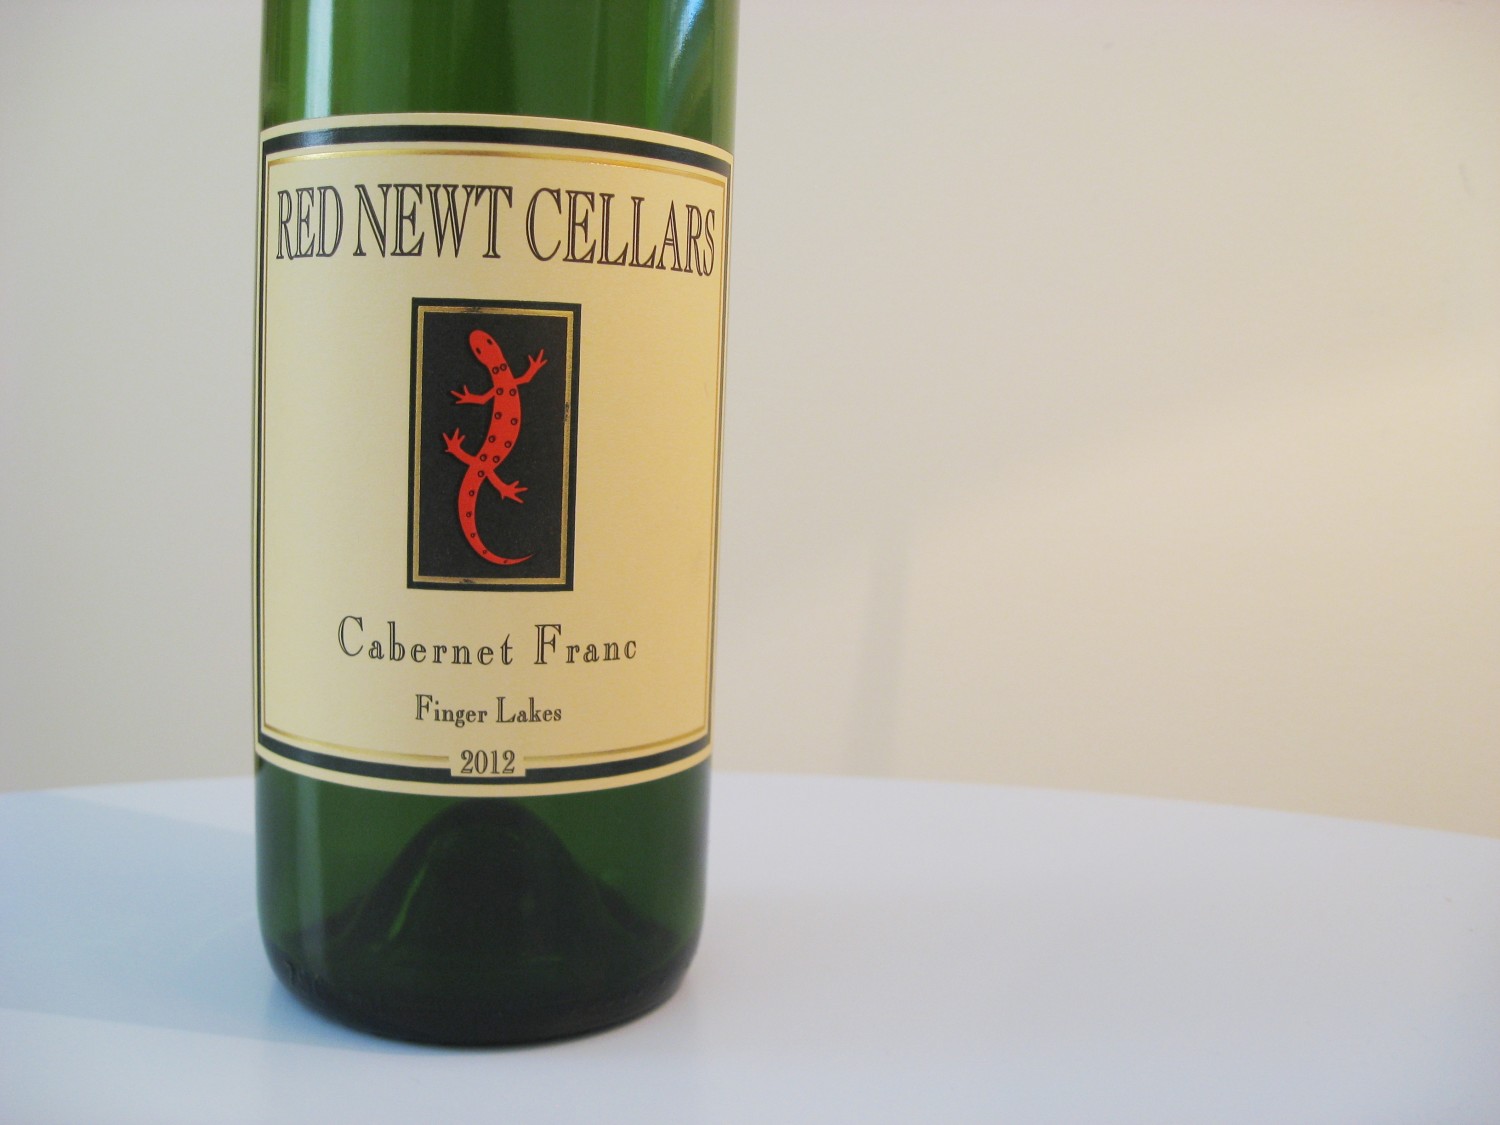 Red Newt Cellars, Cabernet Franc 2012, Finger Lakes, New York, Wine Casual